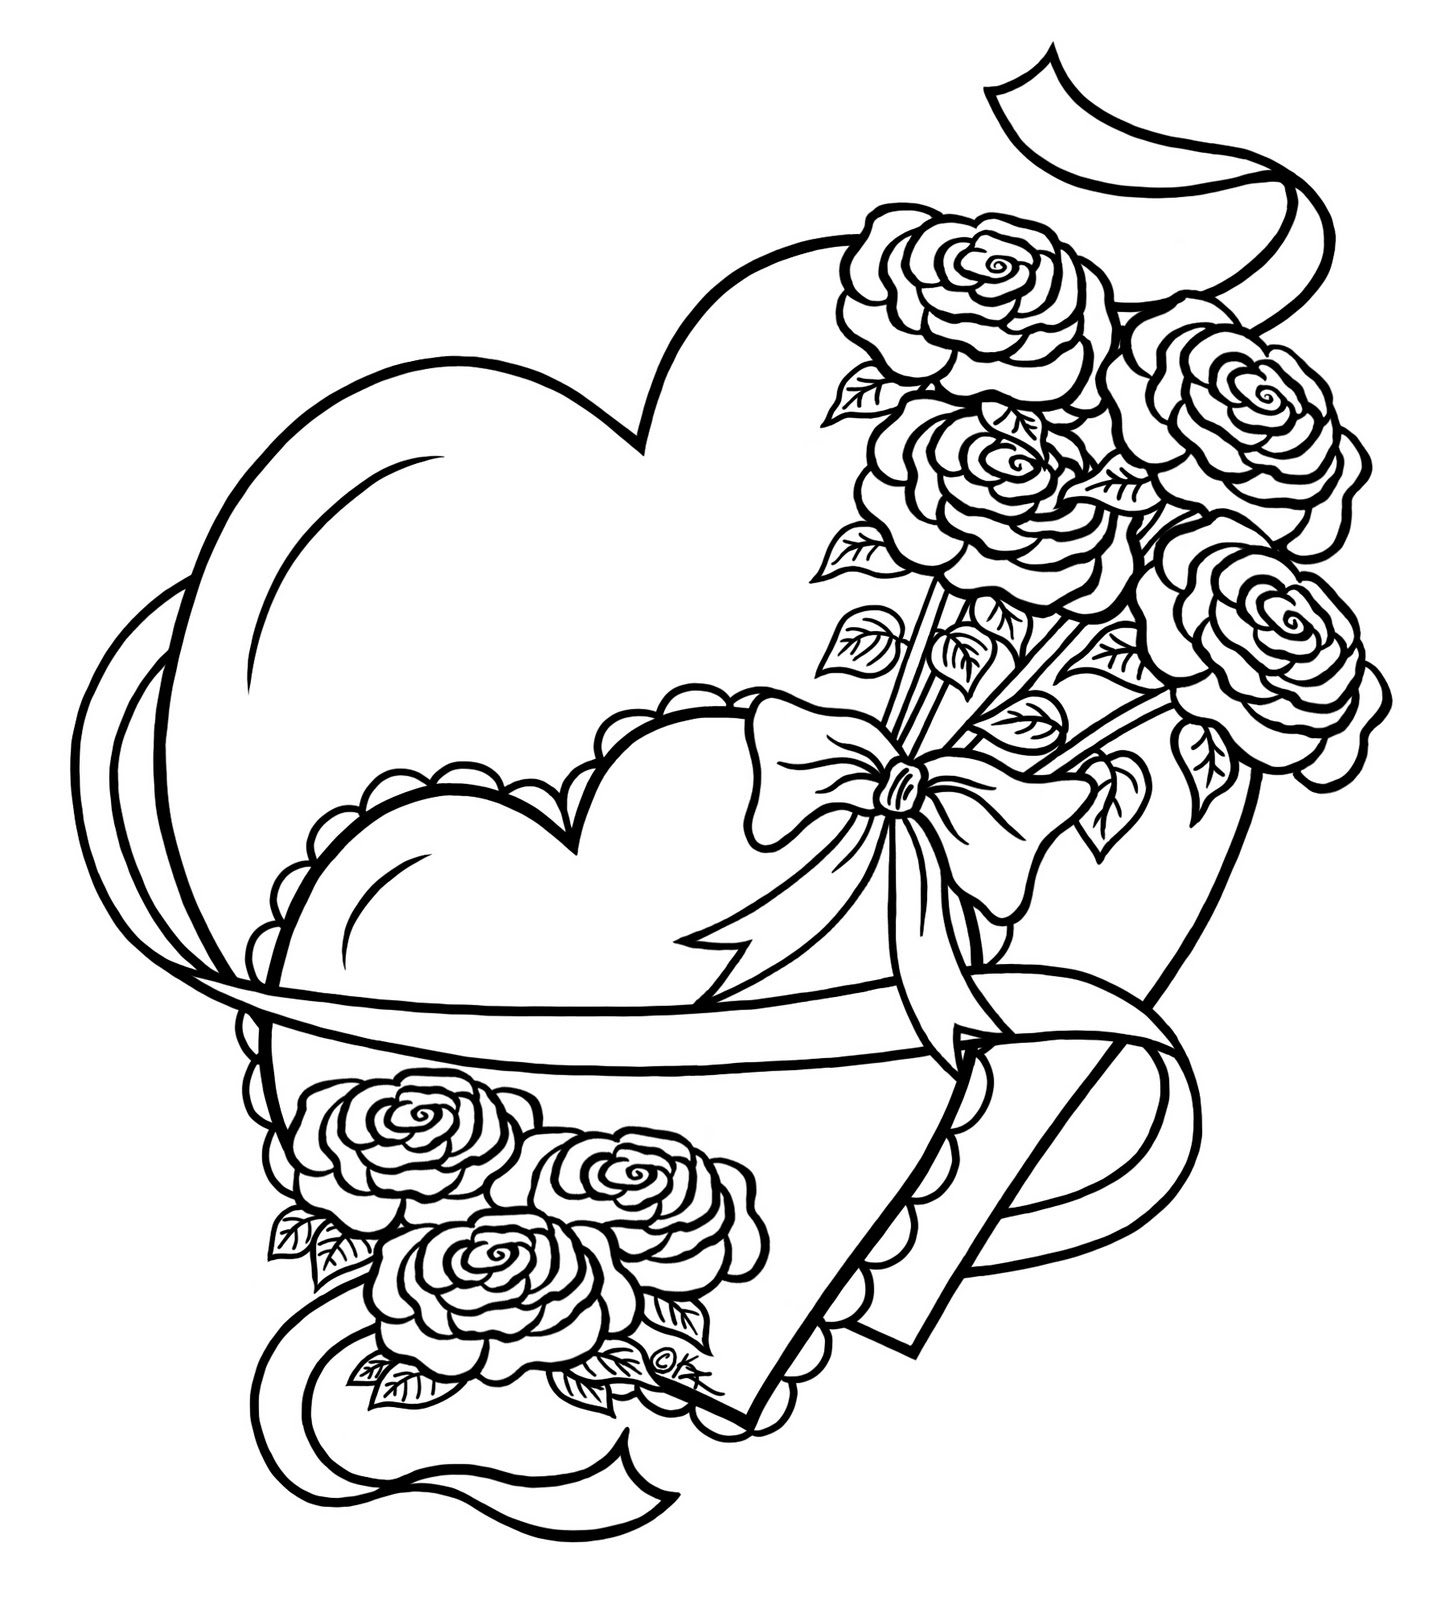 Pencil Drawings Of Hearts And Roses